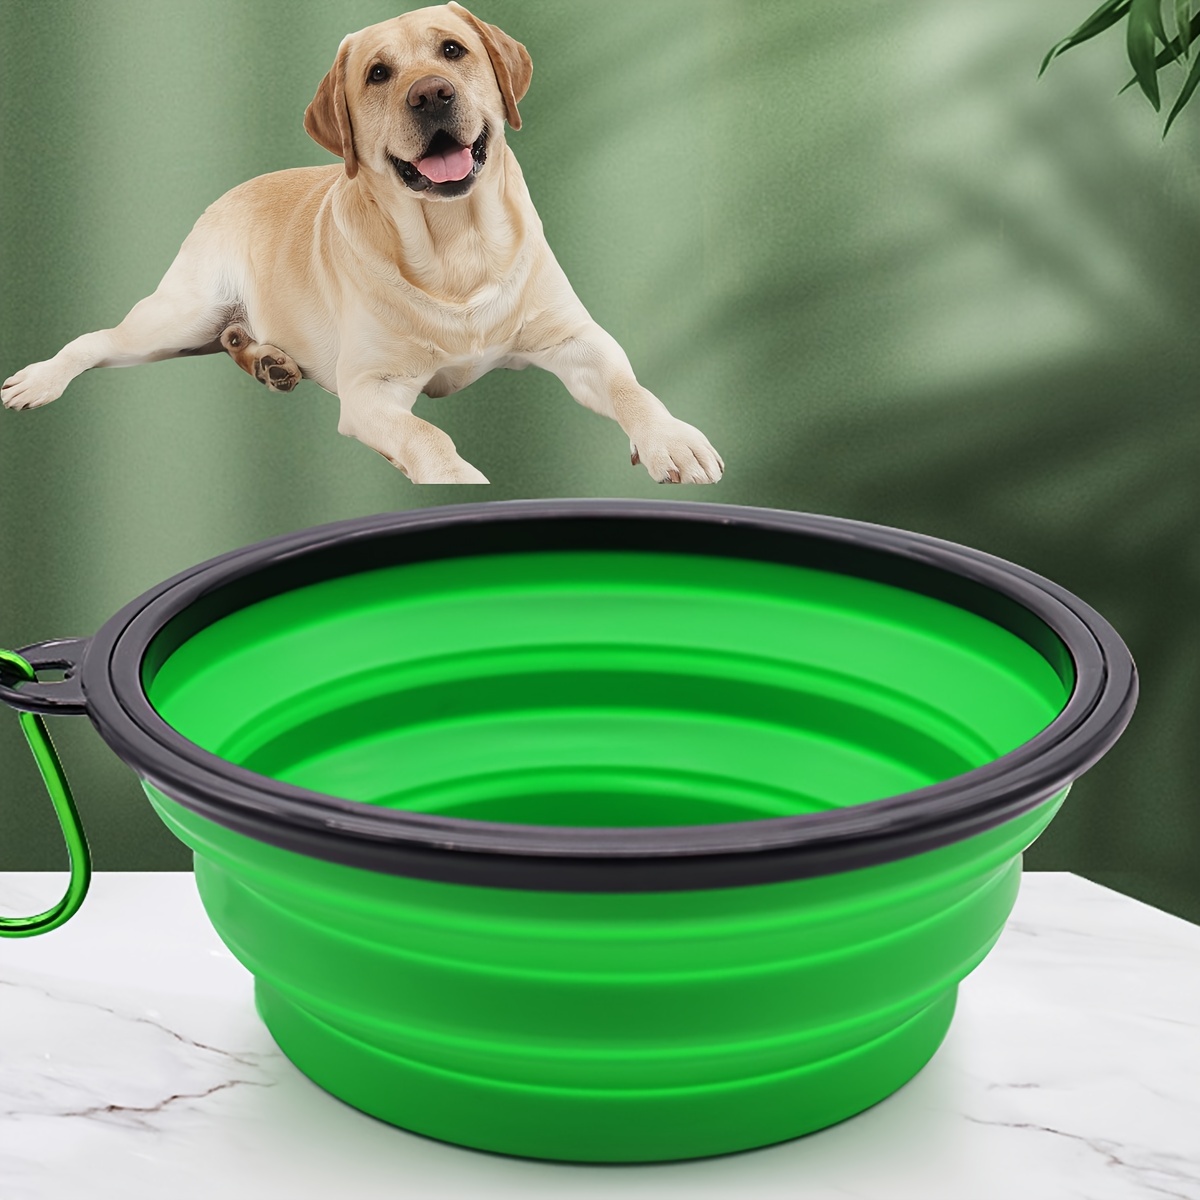 Collapsible Dog Bowl,collapsible Dog Water Bowls For Cats Dogs, Portable Pet  Feeding Watering Dish,portable Dog Water Food Bowl With Carabiner